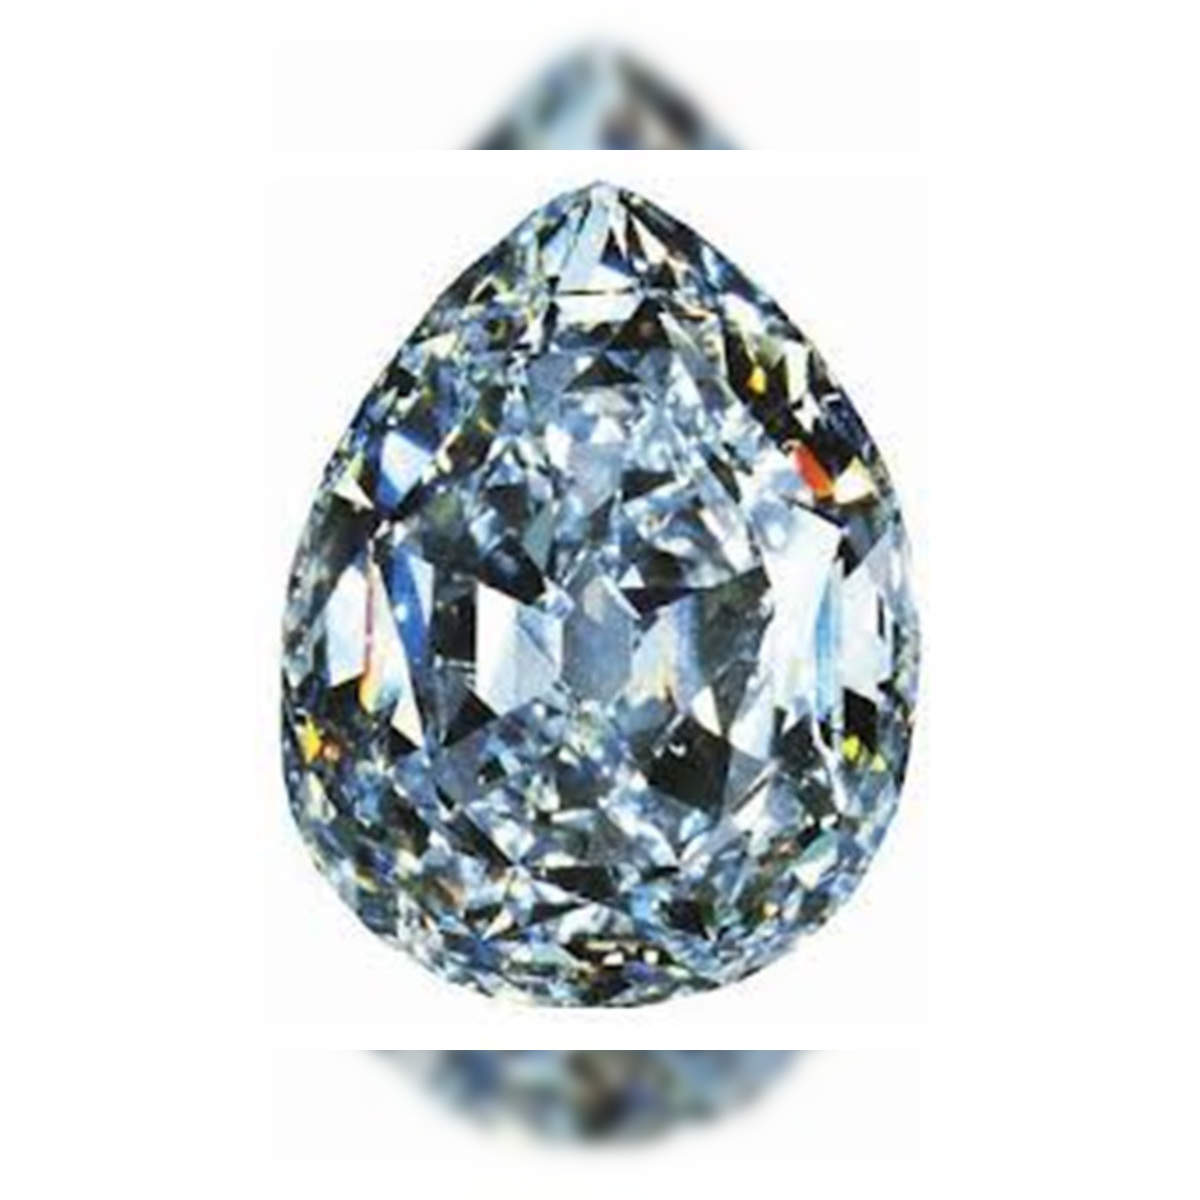 From the 253.7 carat Oppenheimer to 3,106.75 carat Cullinan diamond, here  are the world's most glittering rocks - The Economic Times